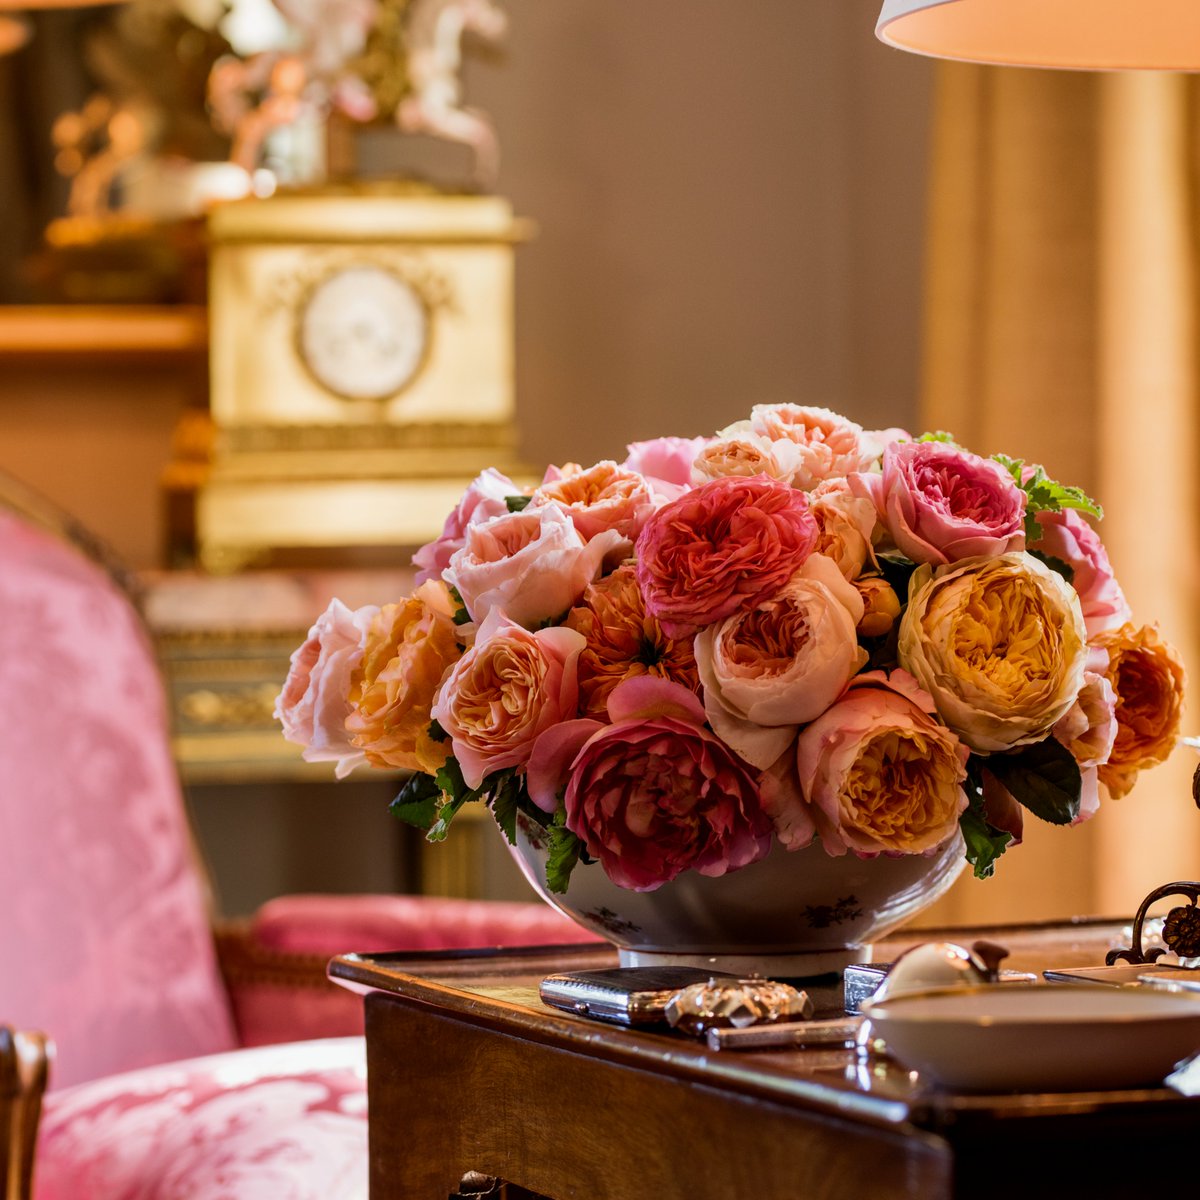 Because every weekend deserves a touch of luxury.  Indulge in the timeless beauty of our garden roses. #pulbrookandgould #london #luxuryflowers #weekendluxury